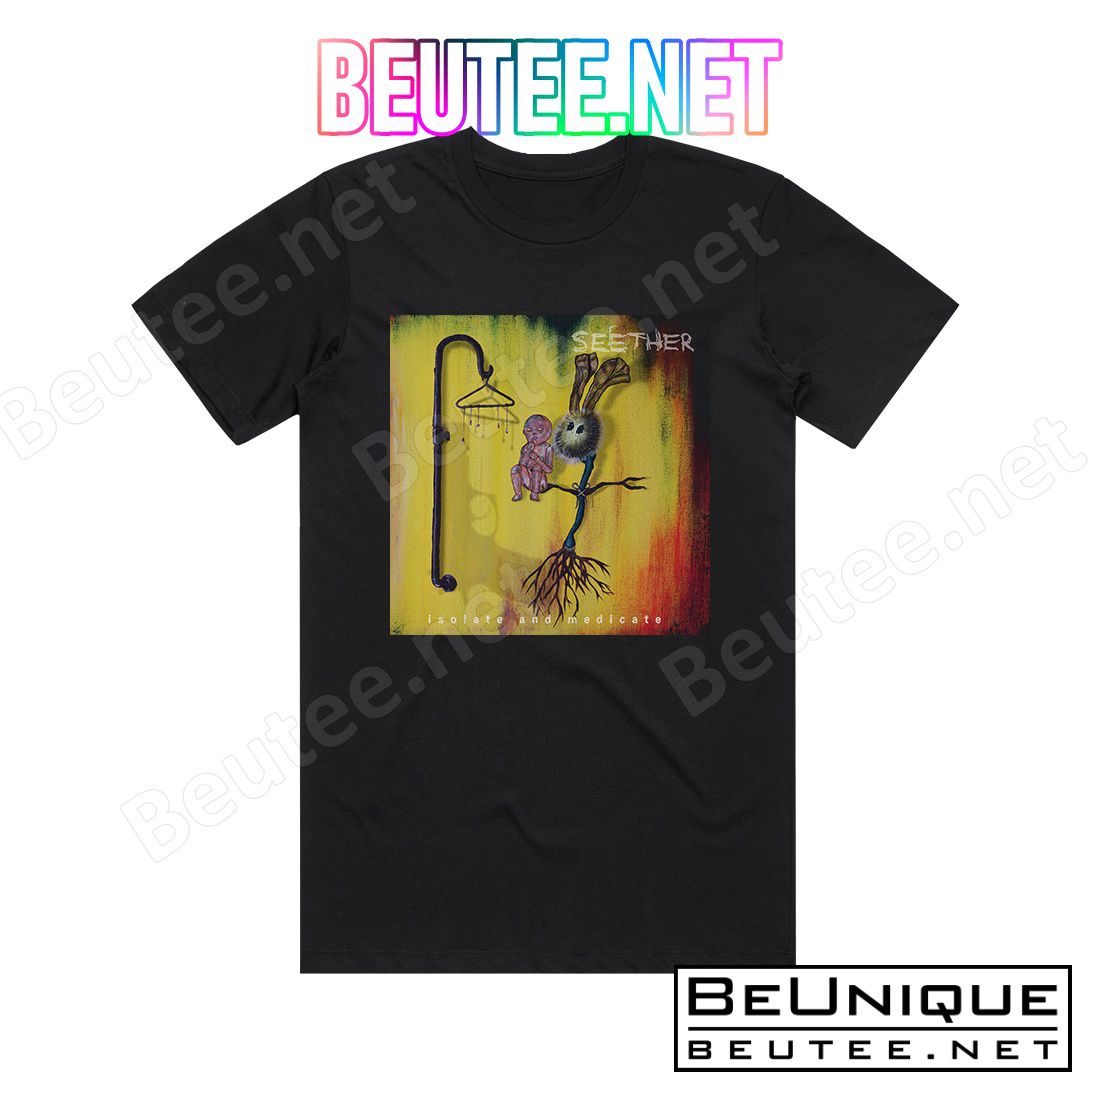 Seether Isolate And Medicate 2 Album Cover T-Shirt